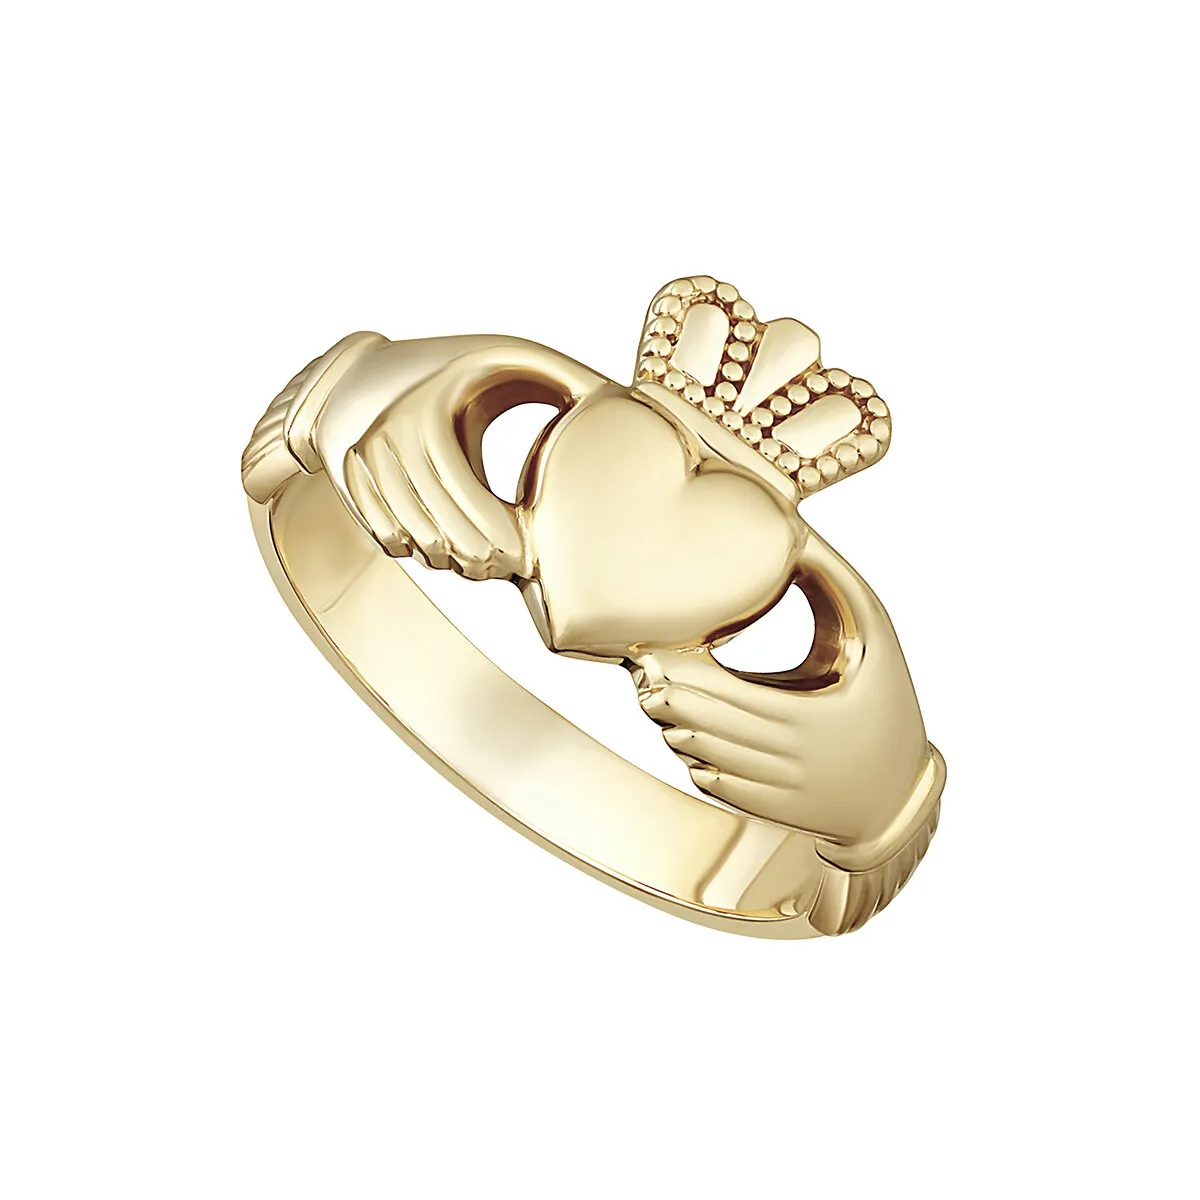 9K Gold Heavy Maids Claddagh Ring